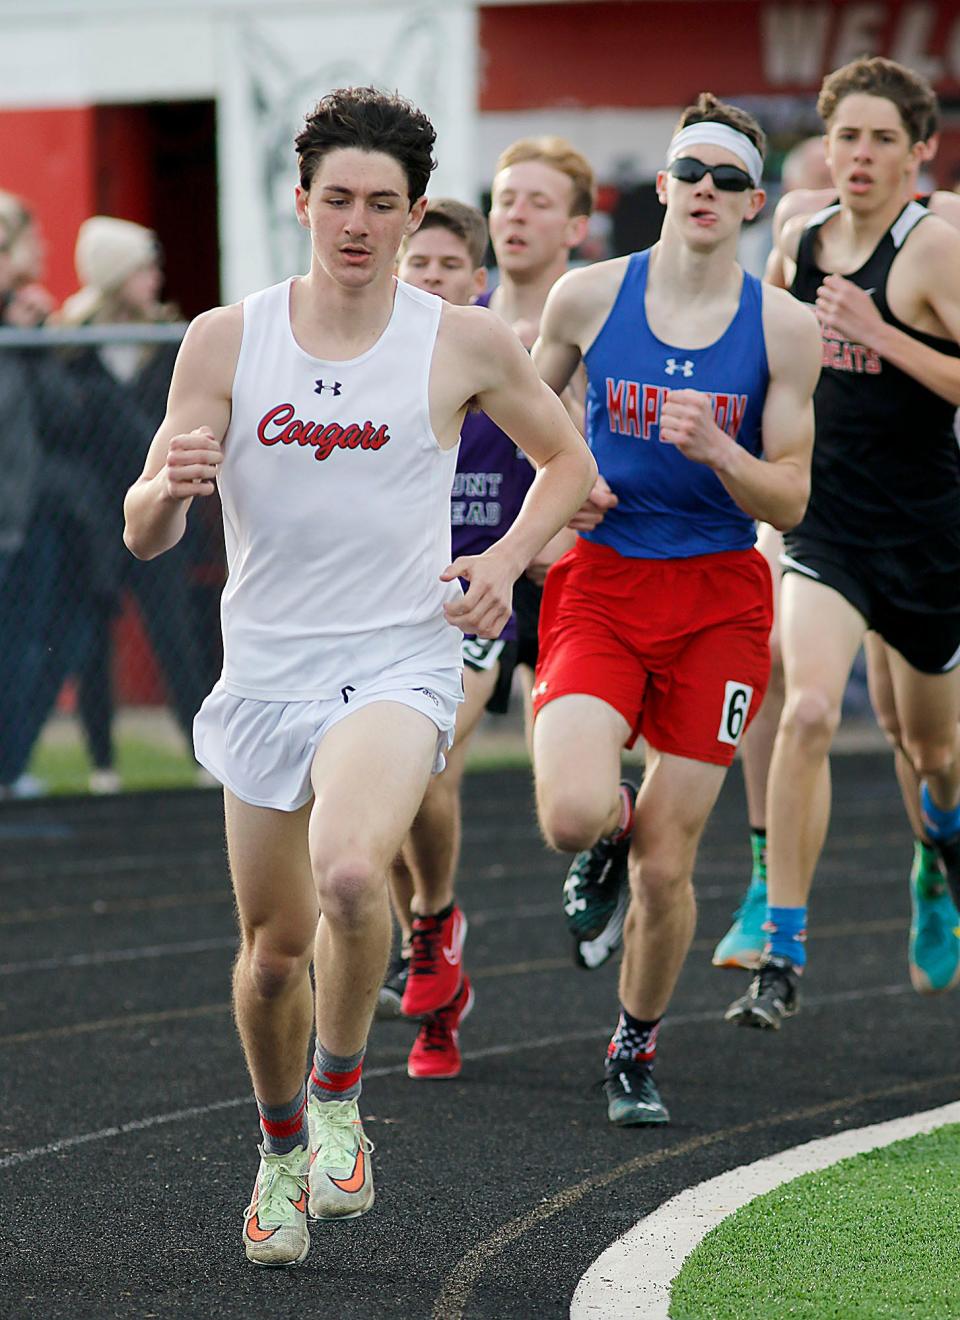 Crestview's Tommy O'Neill competes in the 1600 meter run during the Forrest Pruner Track Invitational at Crestview High School on Friday, April 22, 2022.